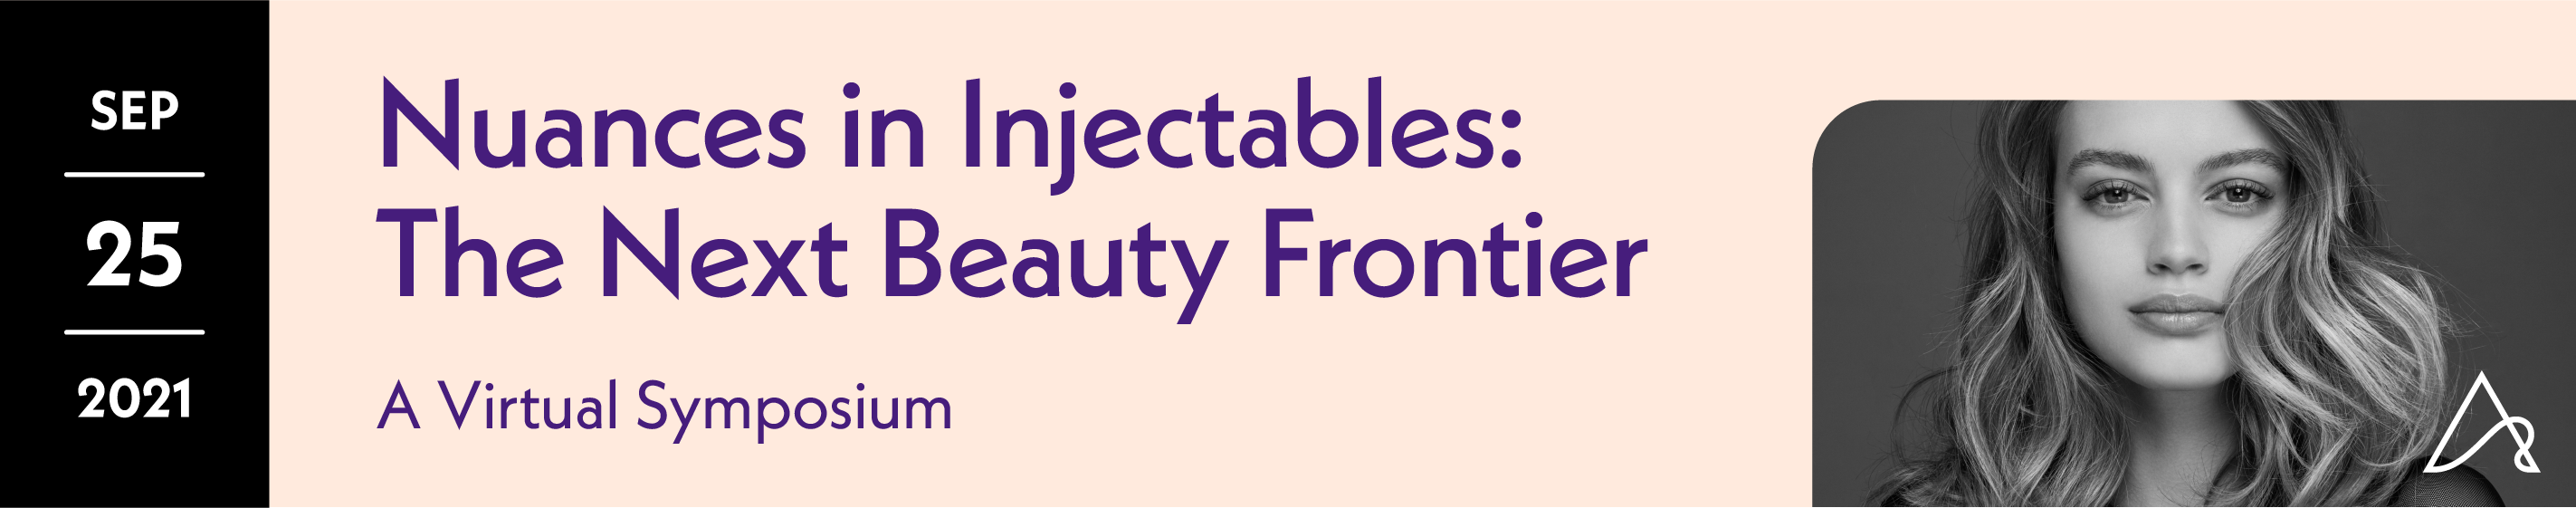 The Aesthetic Society Nuances in Injectables The Next Beauty Frontier 2021